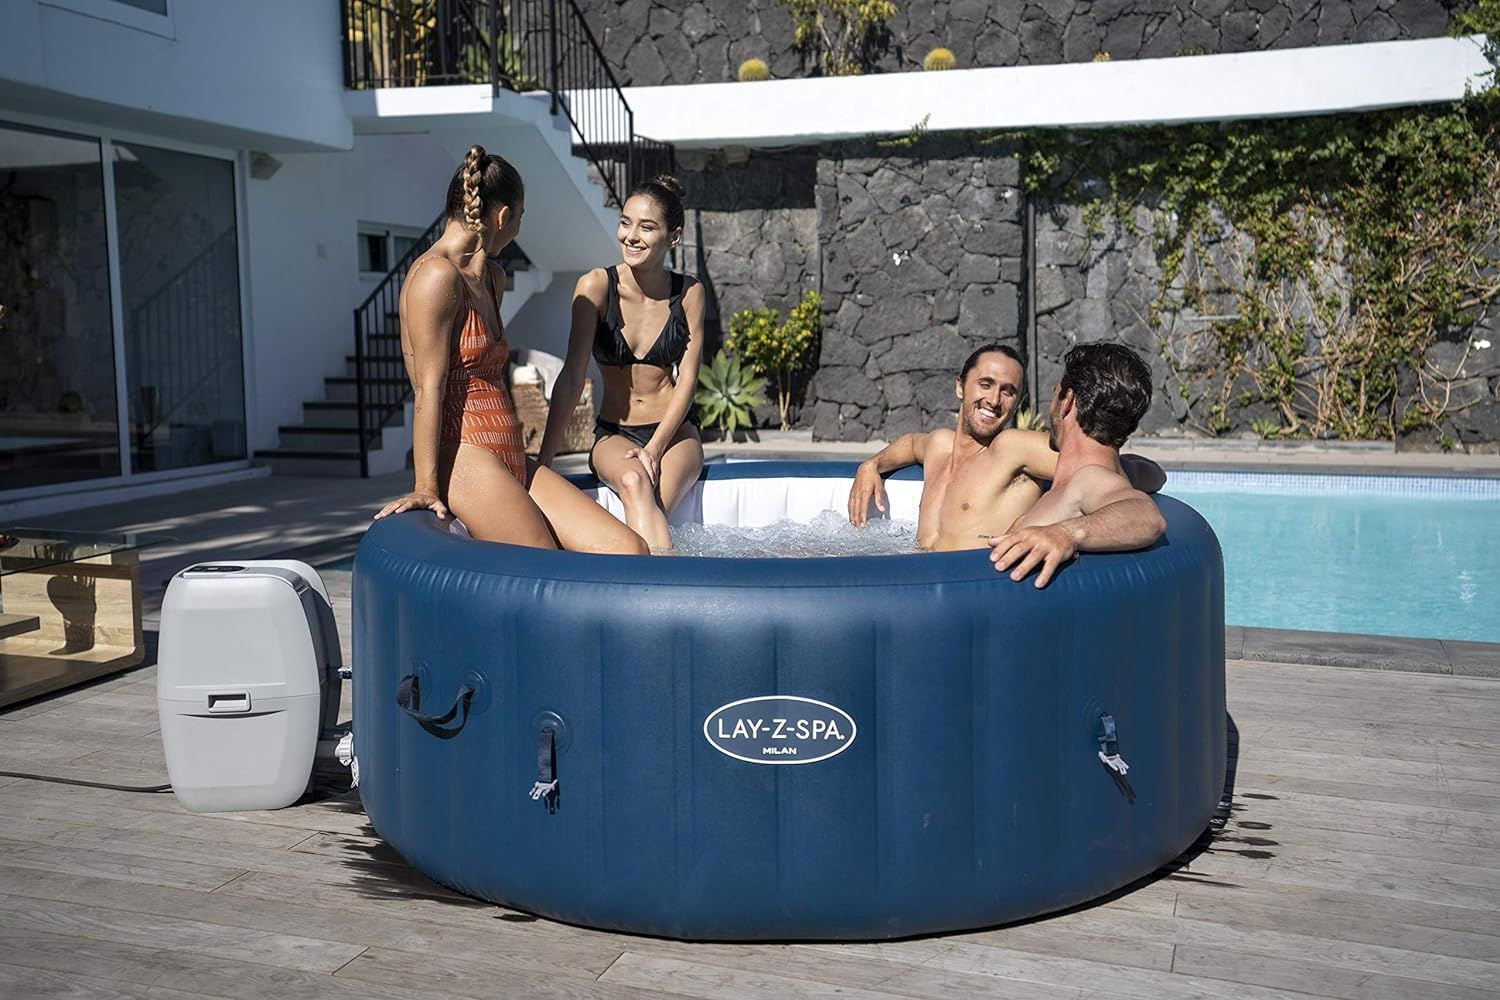 OVER £600,000 OF NEW HOT TUBS TO CLEAR INC LAZ-Y SPASC & CLEVER SPAS!! END OF SEASON SALE WITH OVER 1000 HOTTUBS... ALL STARTING BIDS £20!!